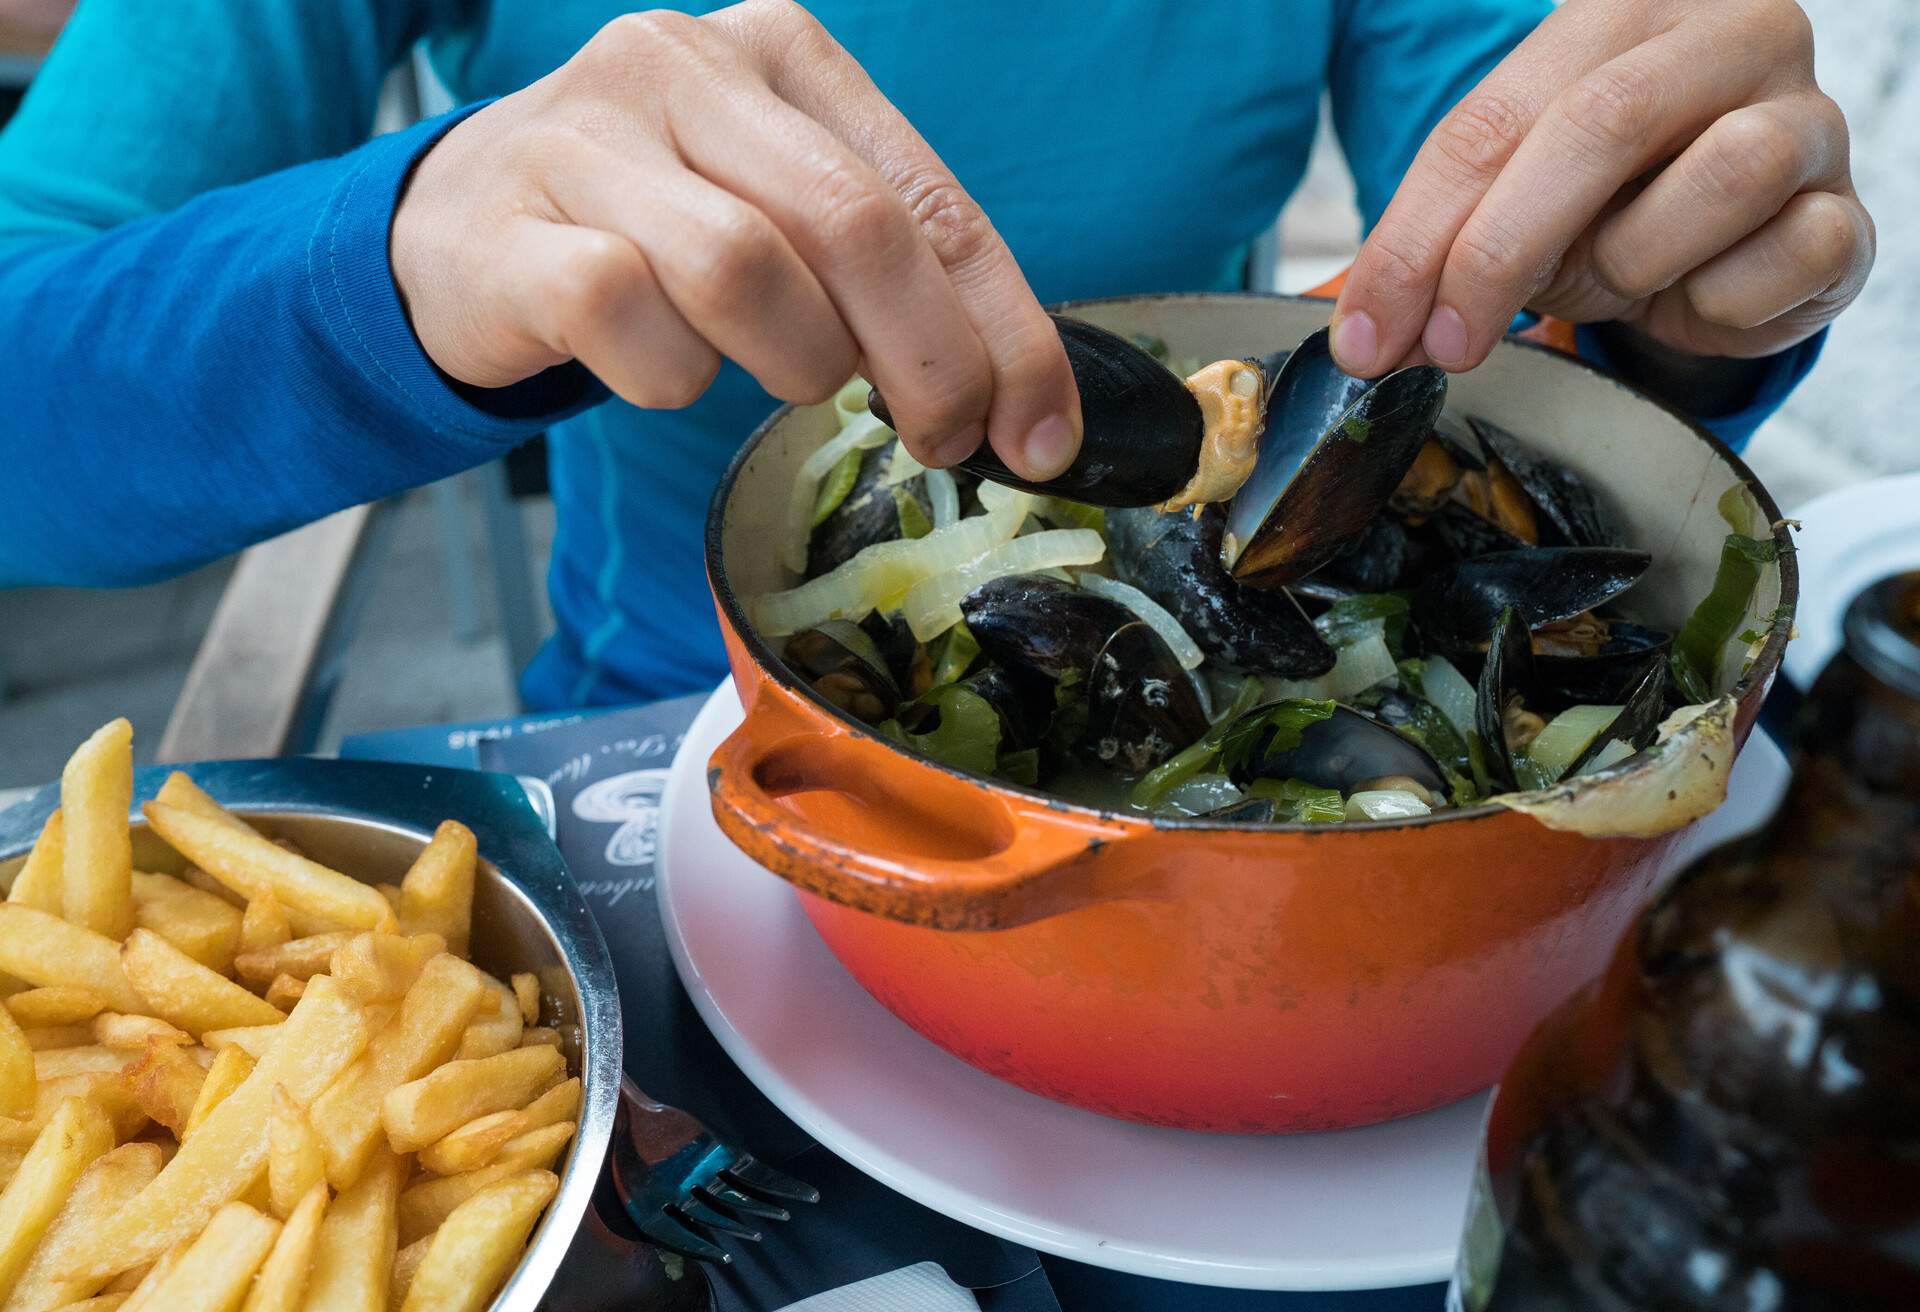 THEME_FOOD_FRENCH_MOULES_FRITES_MUSCLES_FRIES_GettyImages-1173560779